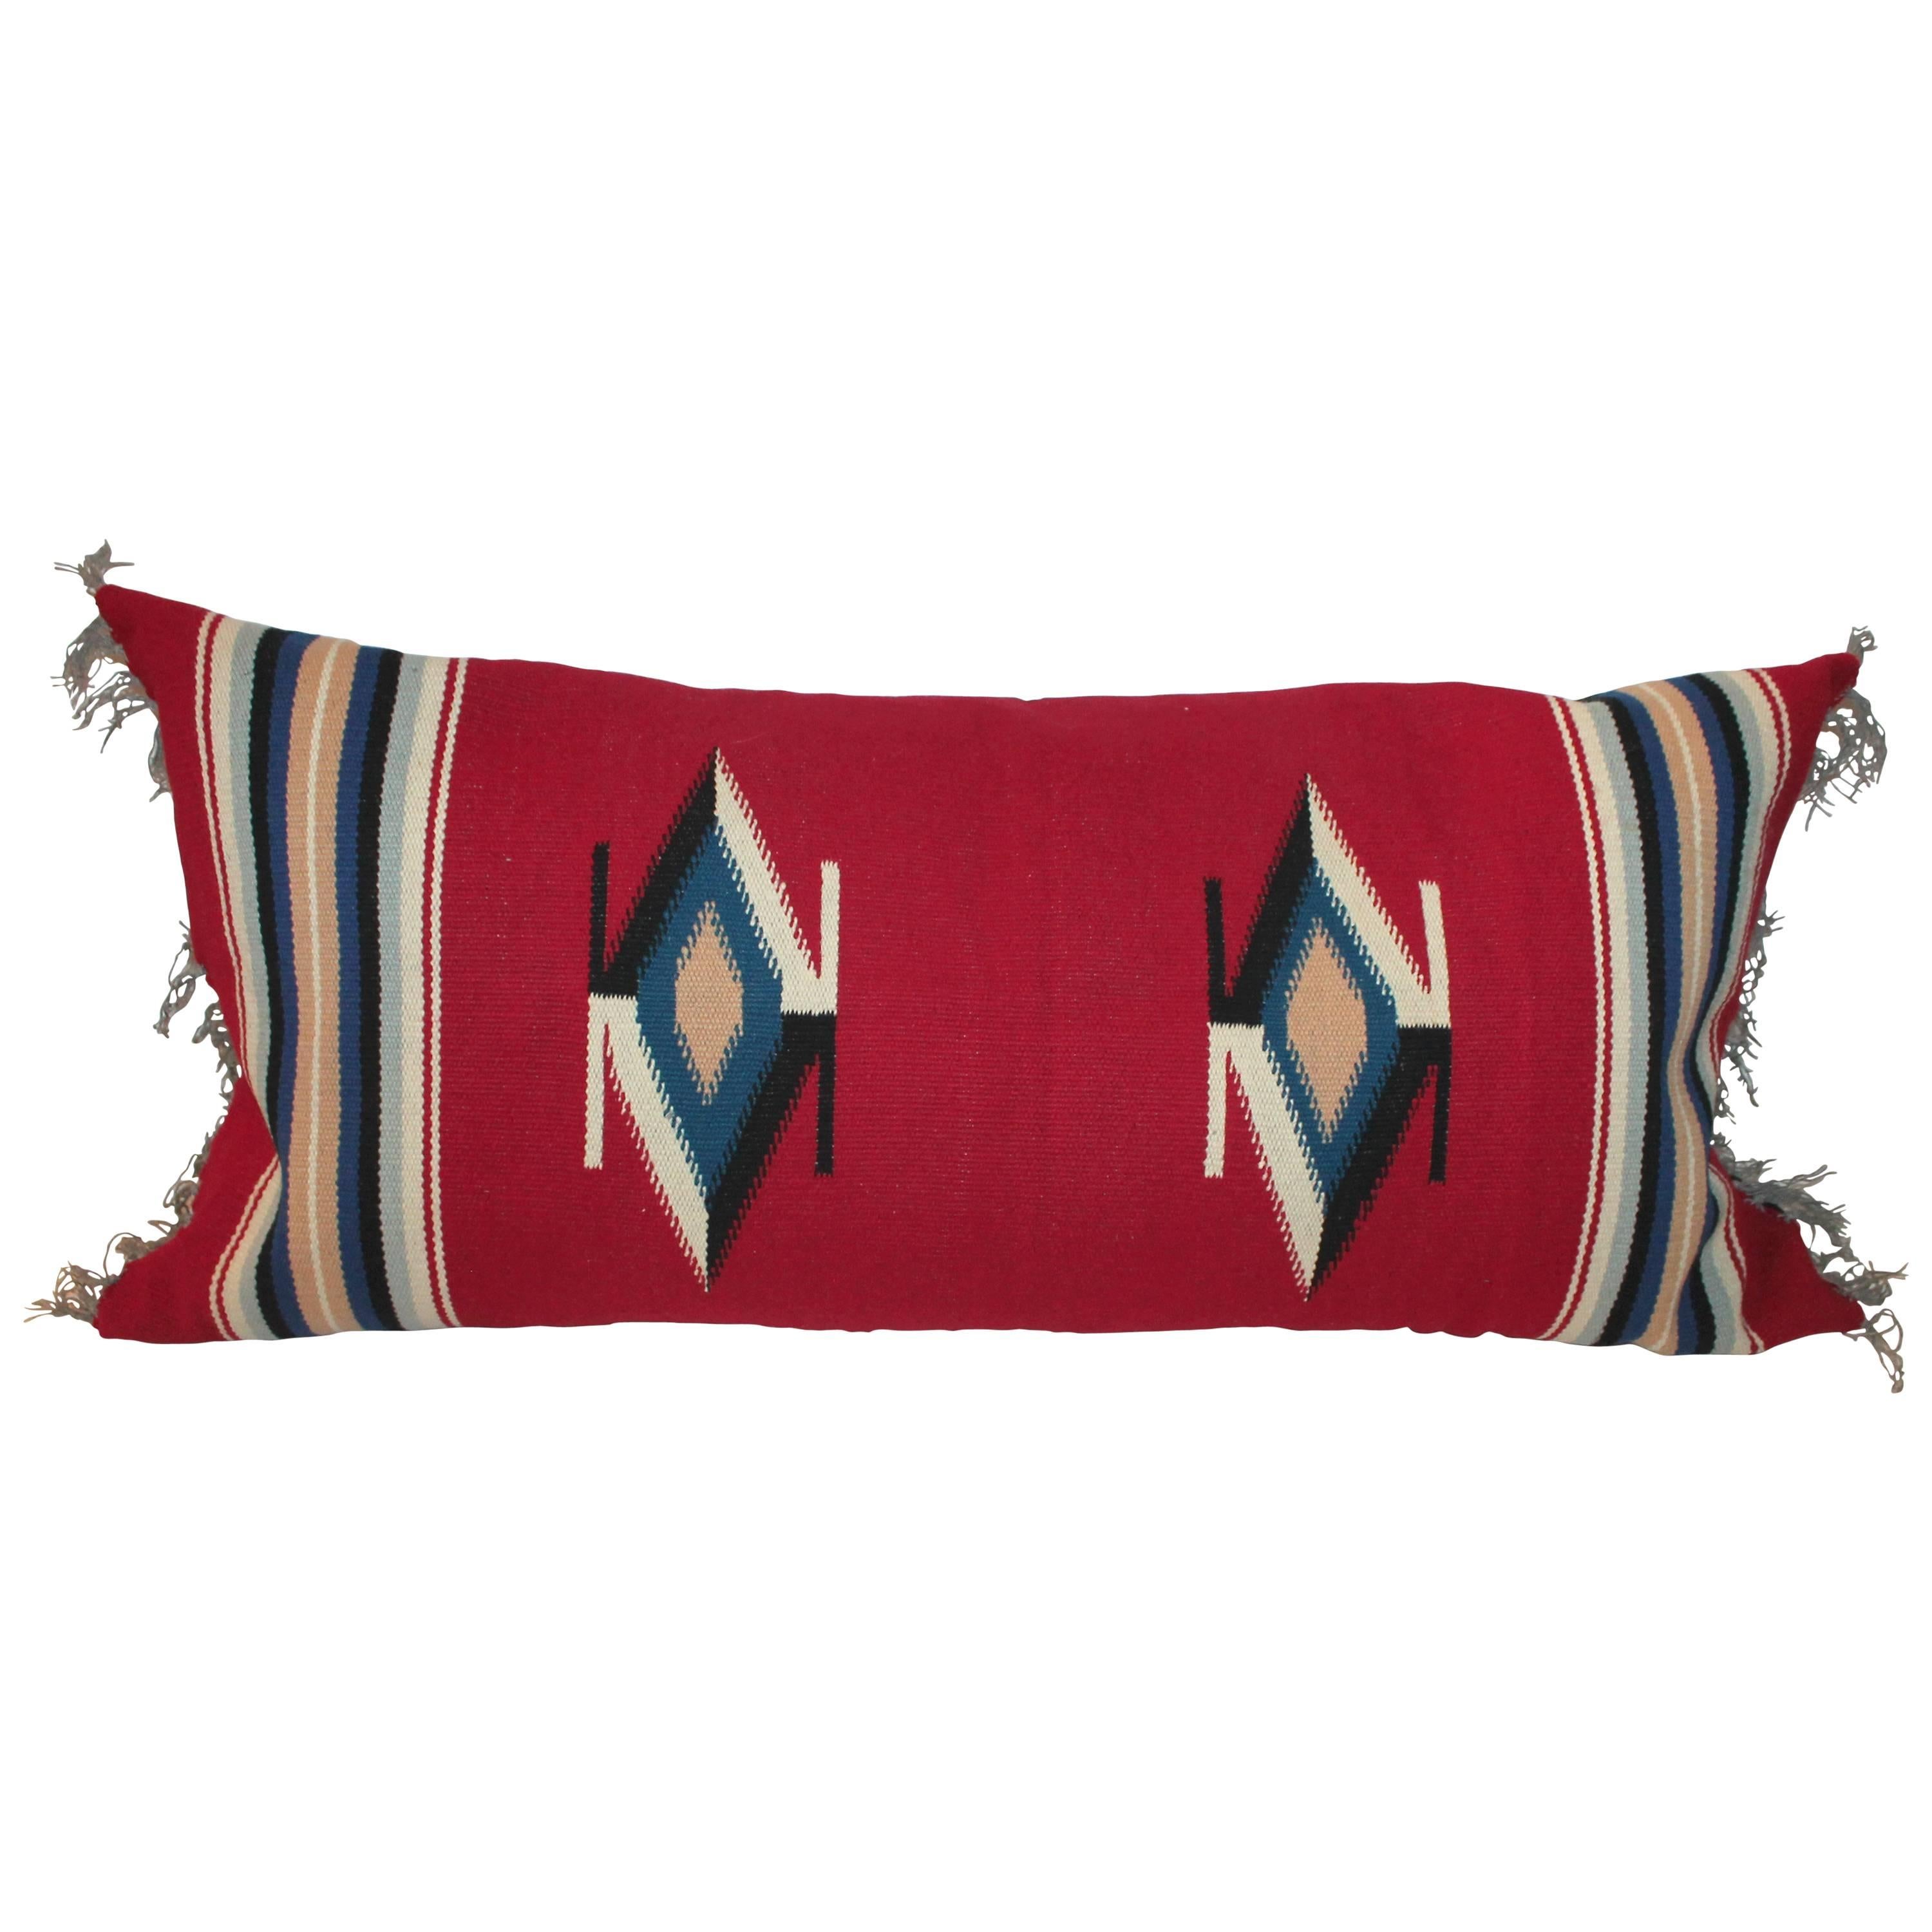 Mexican Indian Handwoven Serape Bolster Pillow For Sale